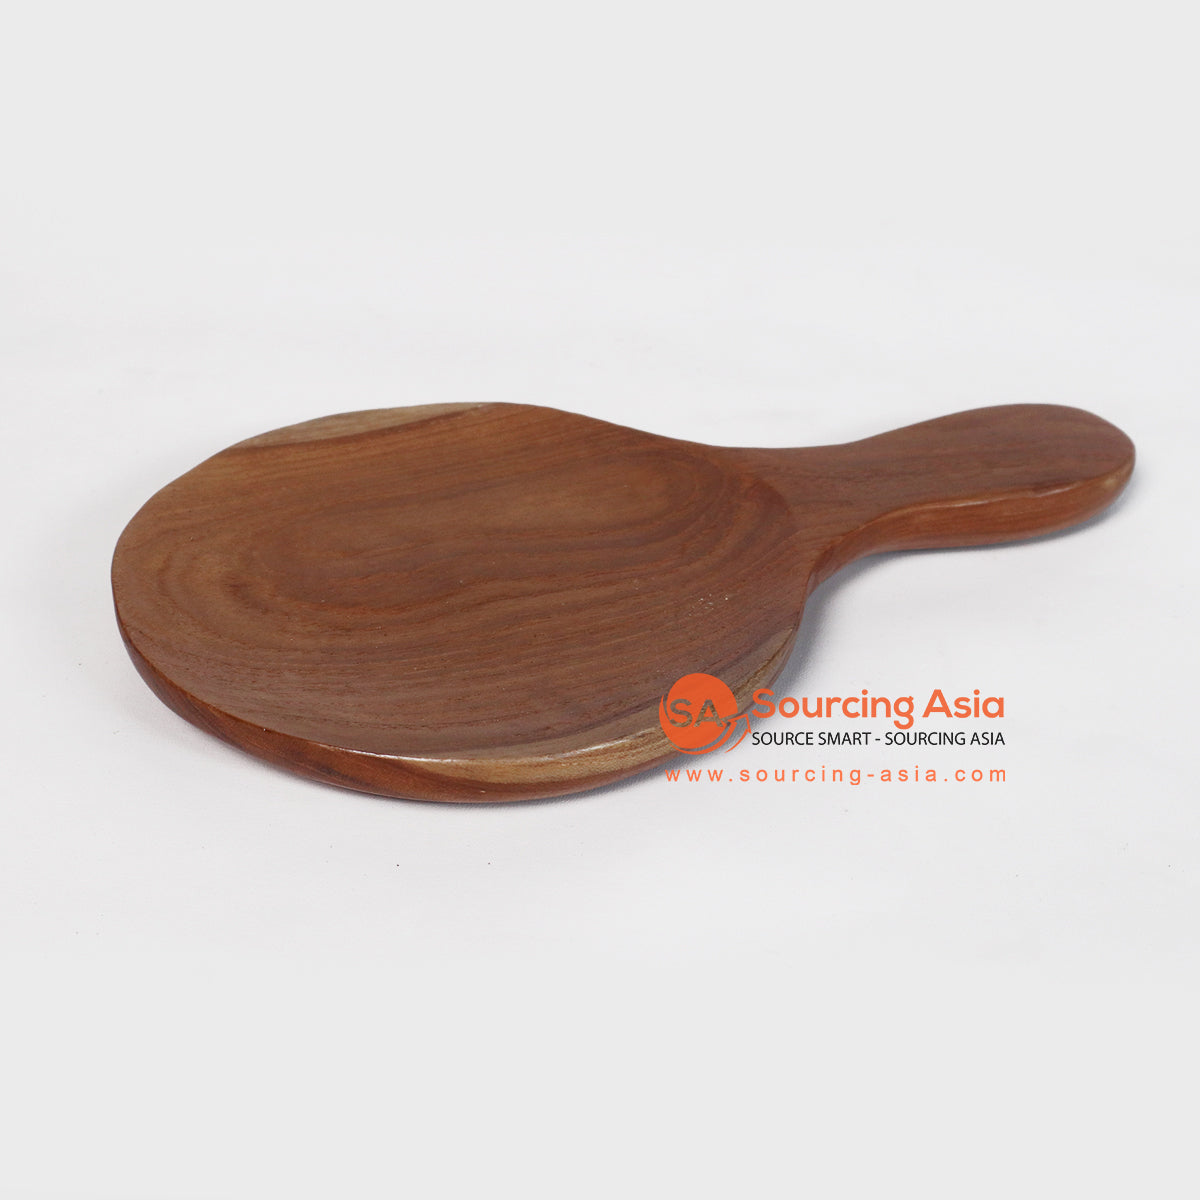 AJE004 BROWN WOODEN CHOPPING BOARD